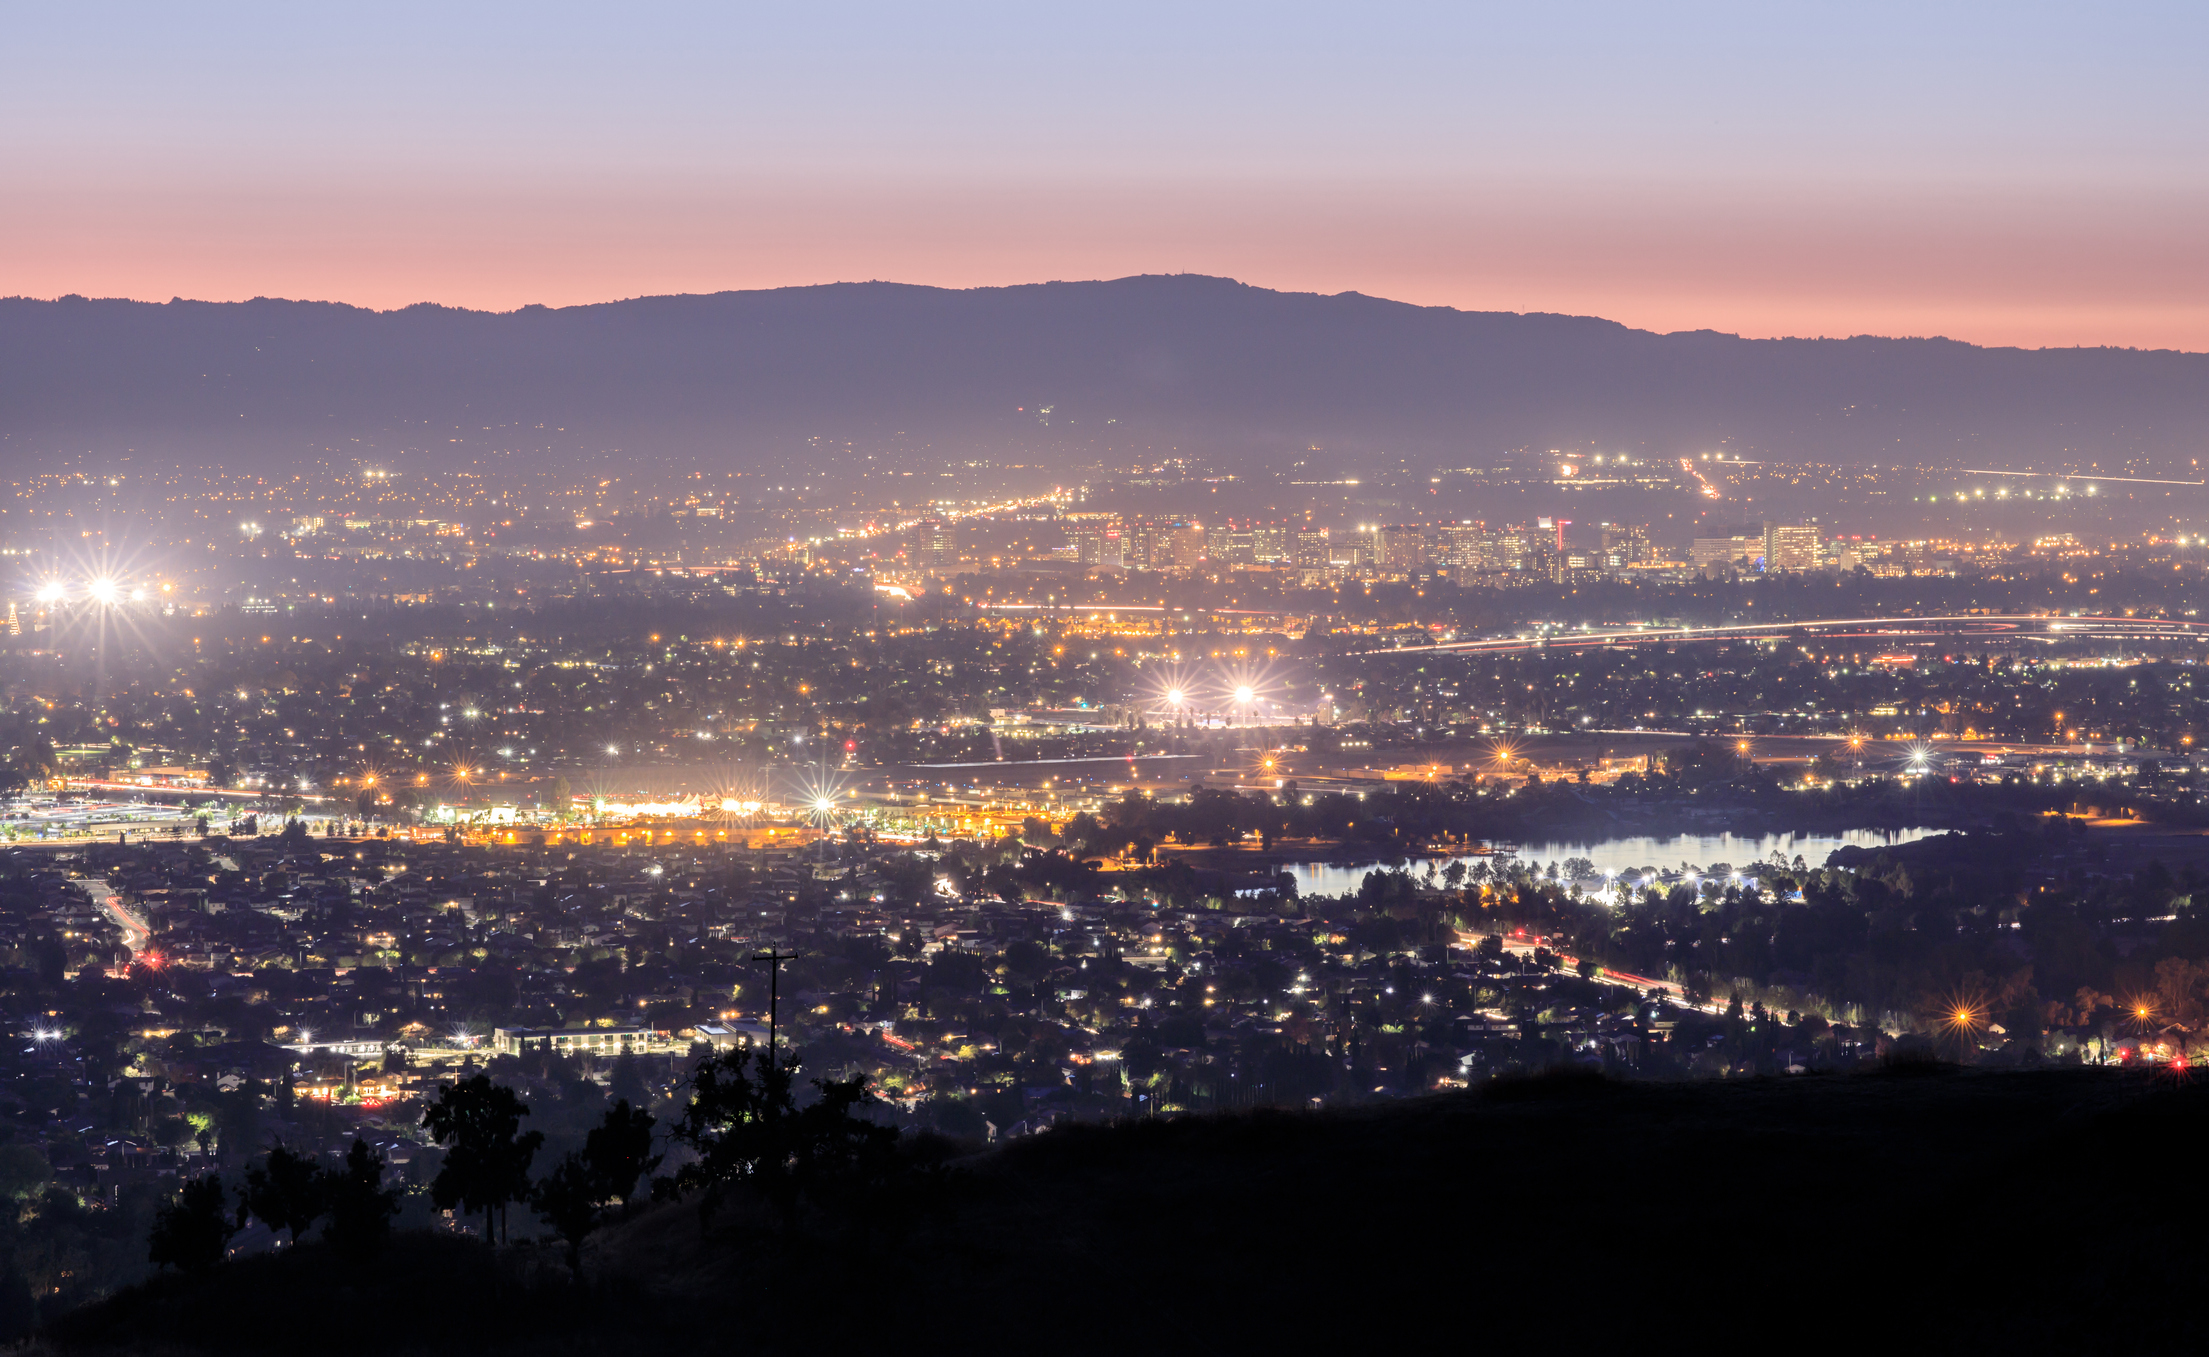 Silicon valley landscape in the evening,